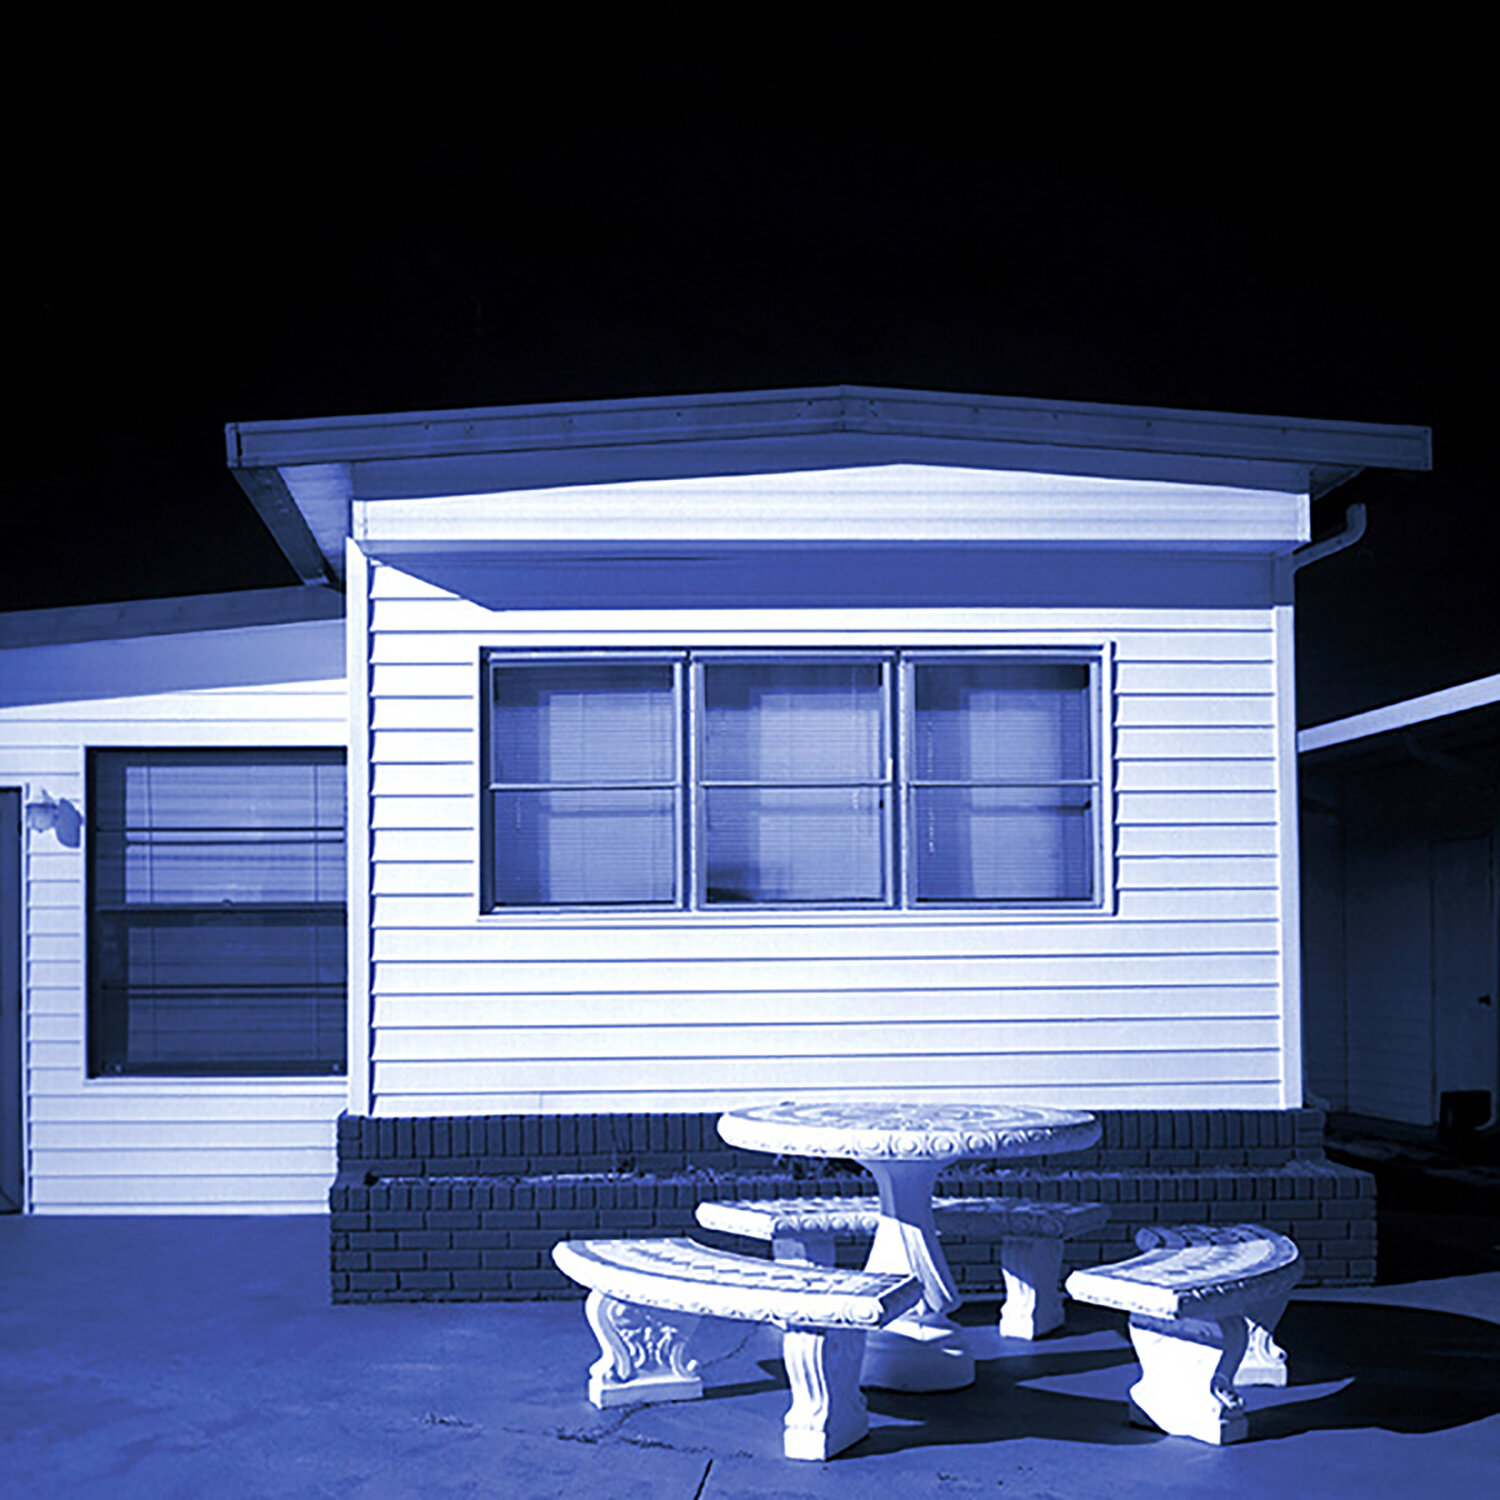 JUDY GELLES | Mobile Home #13, 15 x 15 inches / 38 x 38 cm, Fuji crystal archive print, edition of 10, 2001-2006